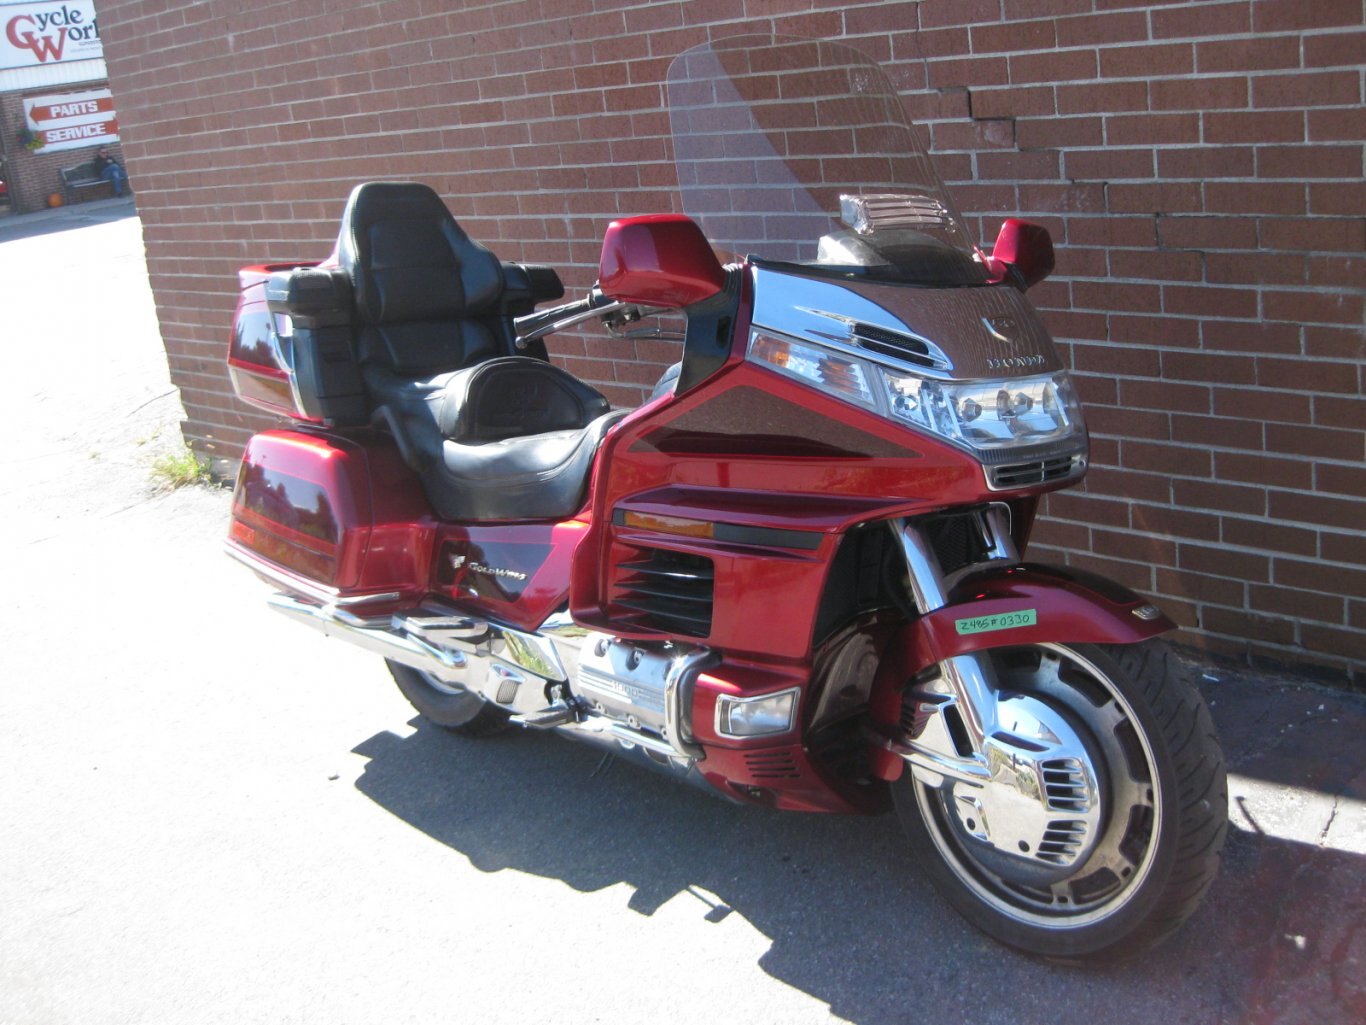 1998 Honda GL1500SE SOLD CONGRATULATIONS TO SIR STEVE!! A GRAND TOURING MOTORCYCLE WELCOME TO THE WORLD OF LUXURY TOURING !!! WHETHER CUTIN THROUGH CITY STREETS OR CARVIN THROUGH THE CANYONS YOU WILL HAVE SMILES FOR MANY MILES WITH THANKS FROM GARY & TEAM CYCLE WORLD!!!!